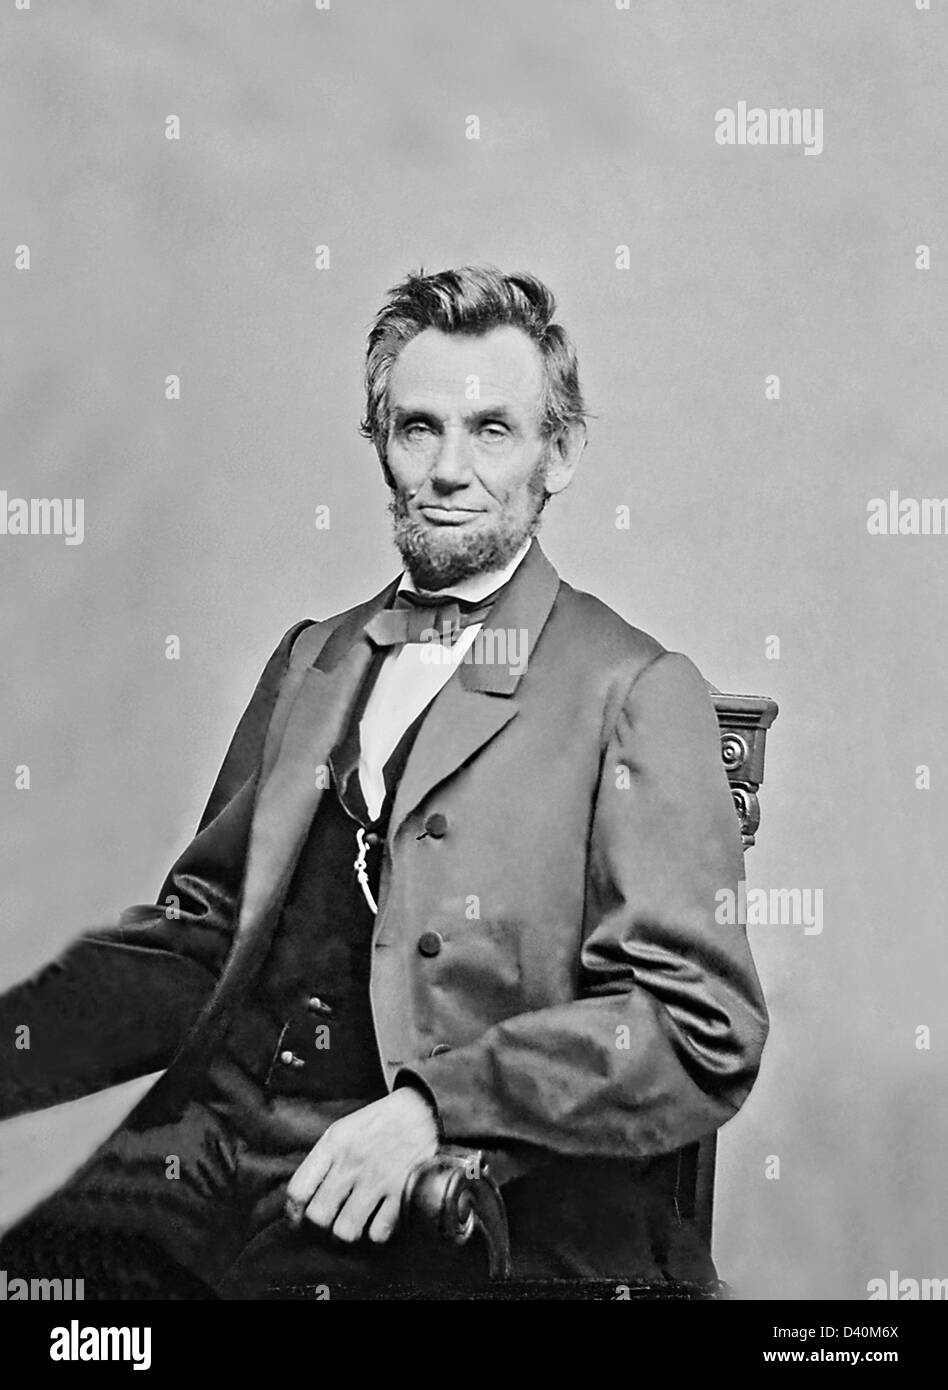 Tintype wet plate portrait of President Abraham Lincoln by Matthew Brady circa 1863. Portrait has been retouched from original. Stock Photo